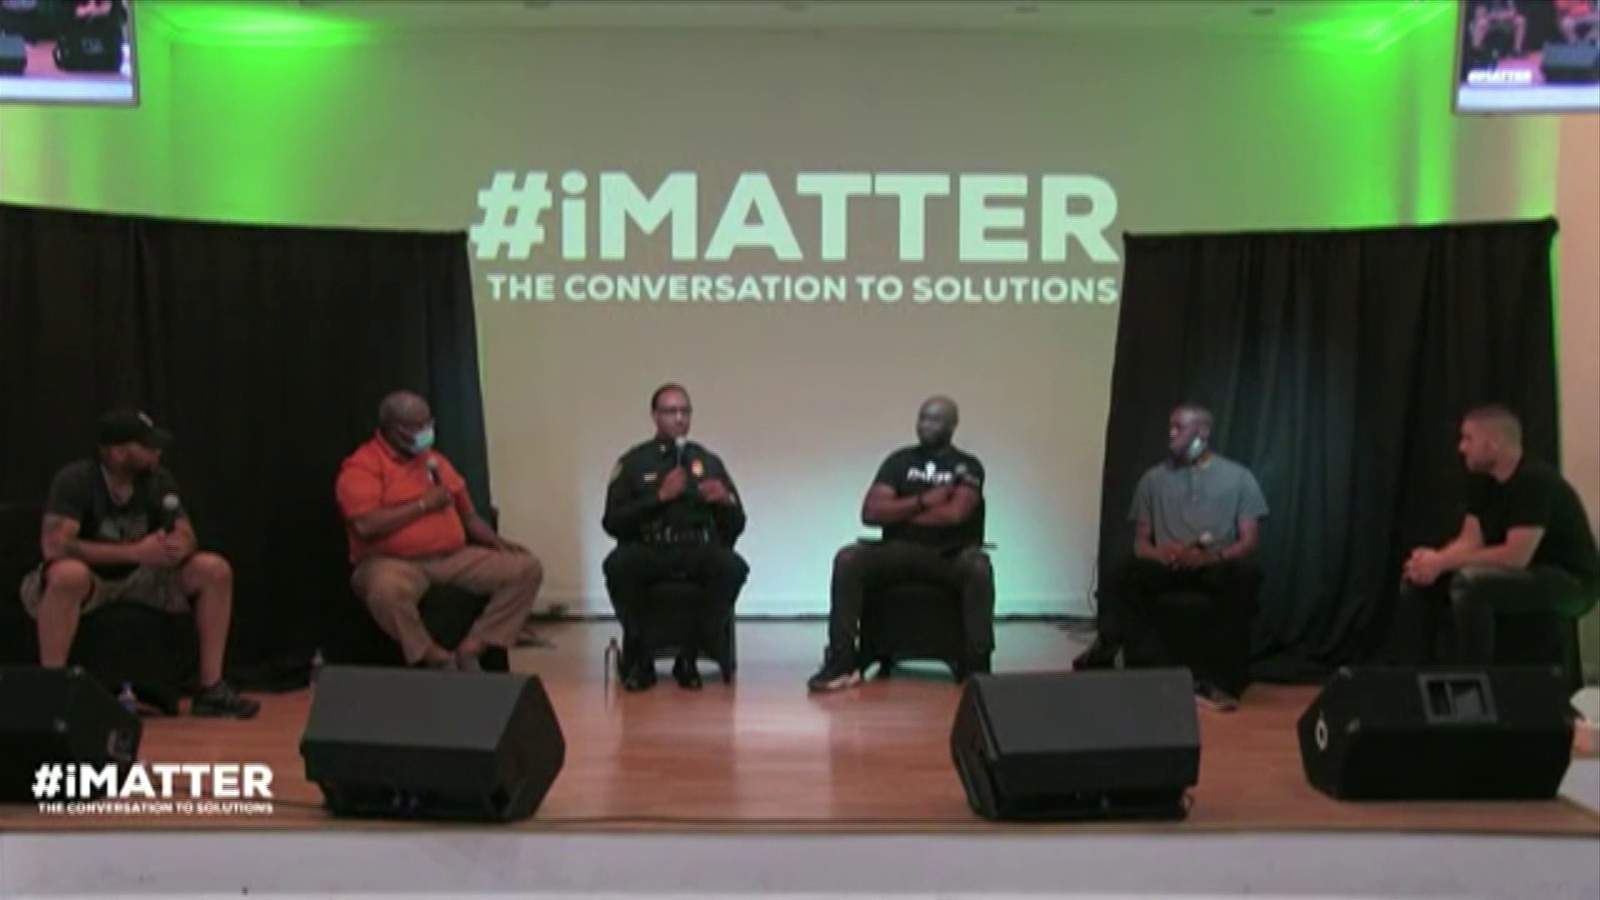 Pastor brings Roanoke mayor, police chief and protesters together for conversation